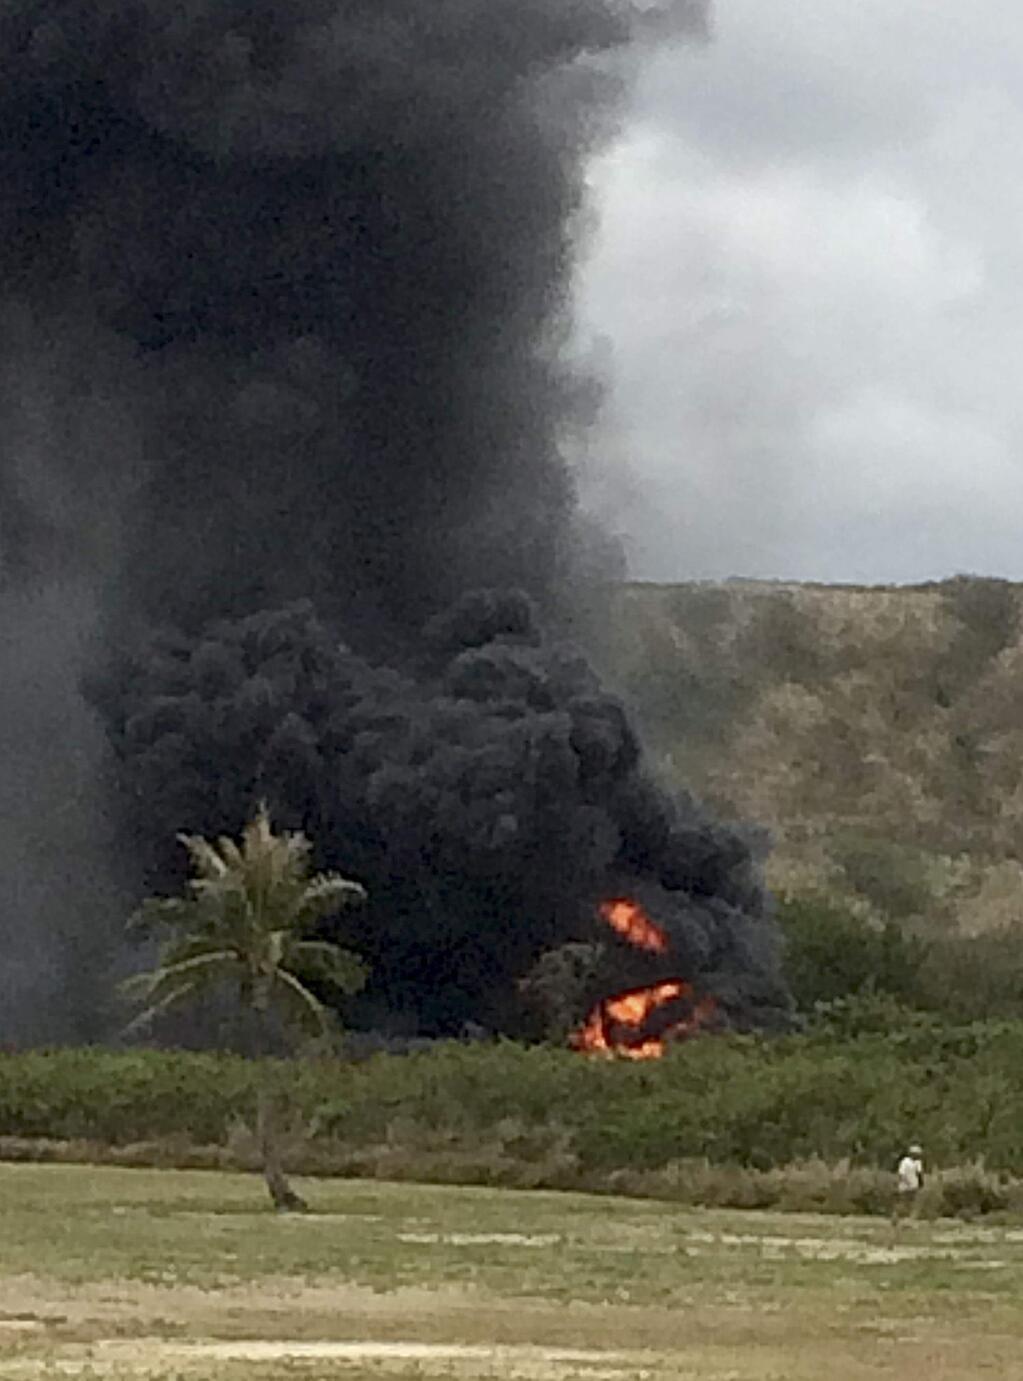 In this May 17, 2015 photo, smoke rises from a Marine Corps Osprey aircraft after making a hard landing near Bellows Air Force Station near Waimanalo, Hawaii. The fatal crash of the Marine Corps' new hybridized airplane-and-helicopter aircraft during a training exercise is renewing safety concerns about the machine. (Zane Dulin via AP)